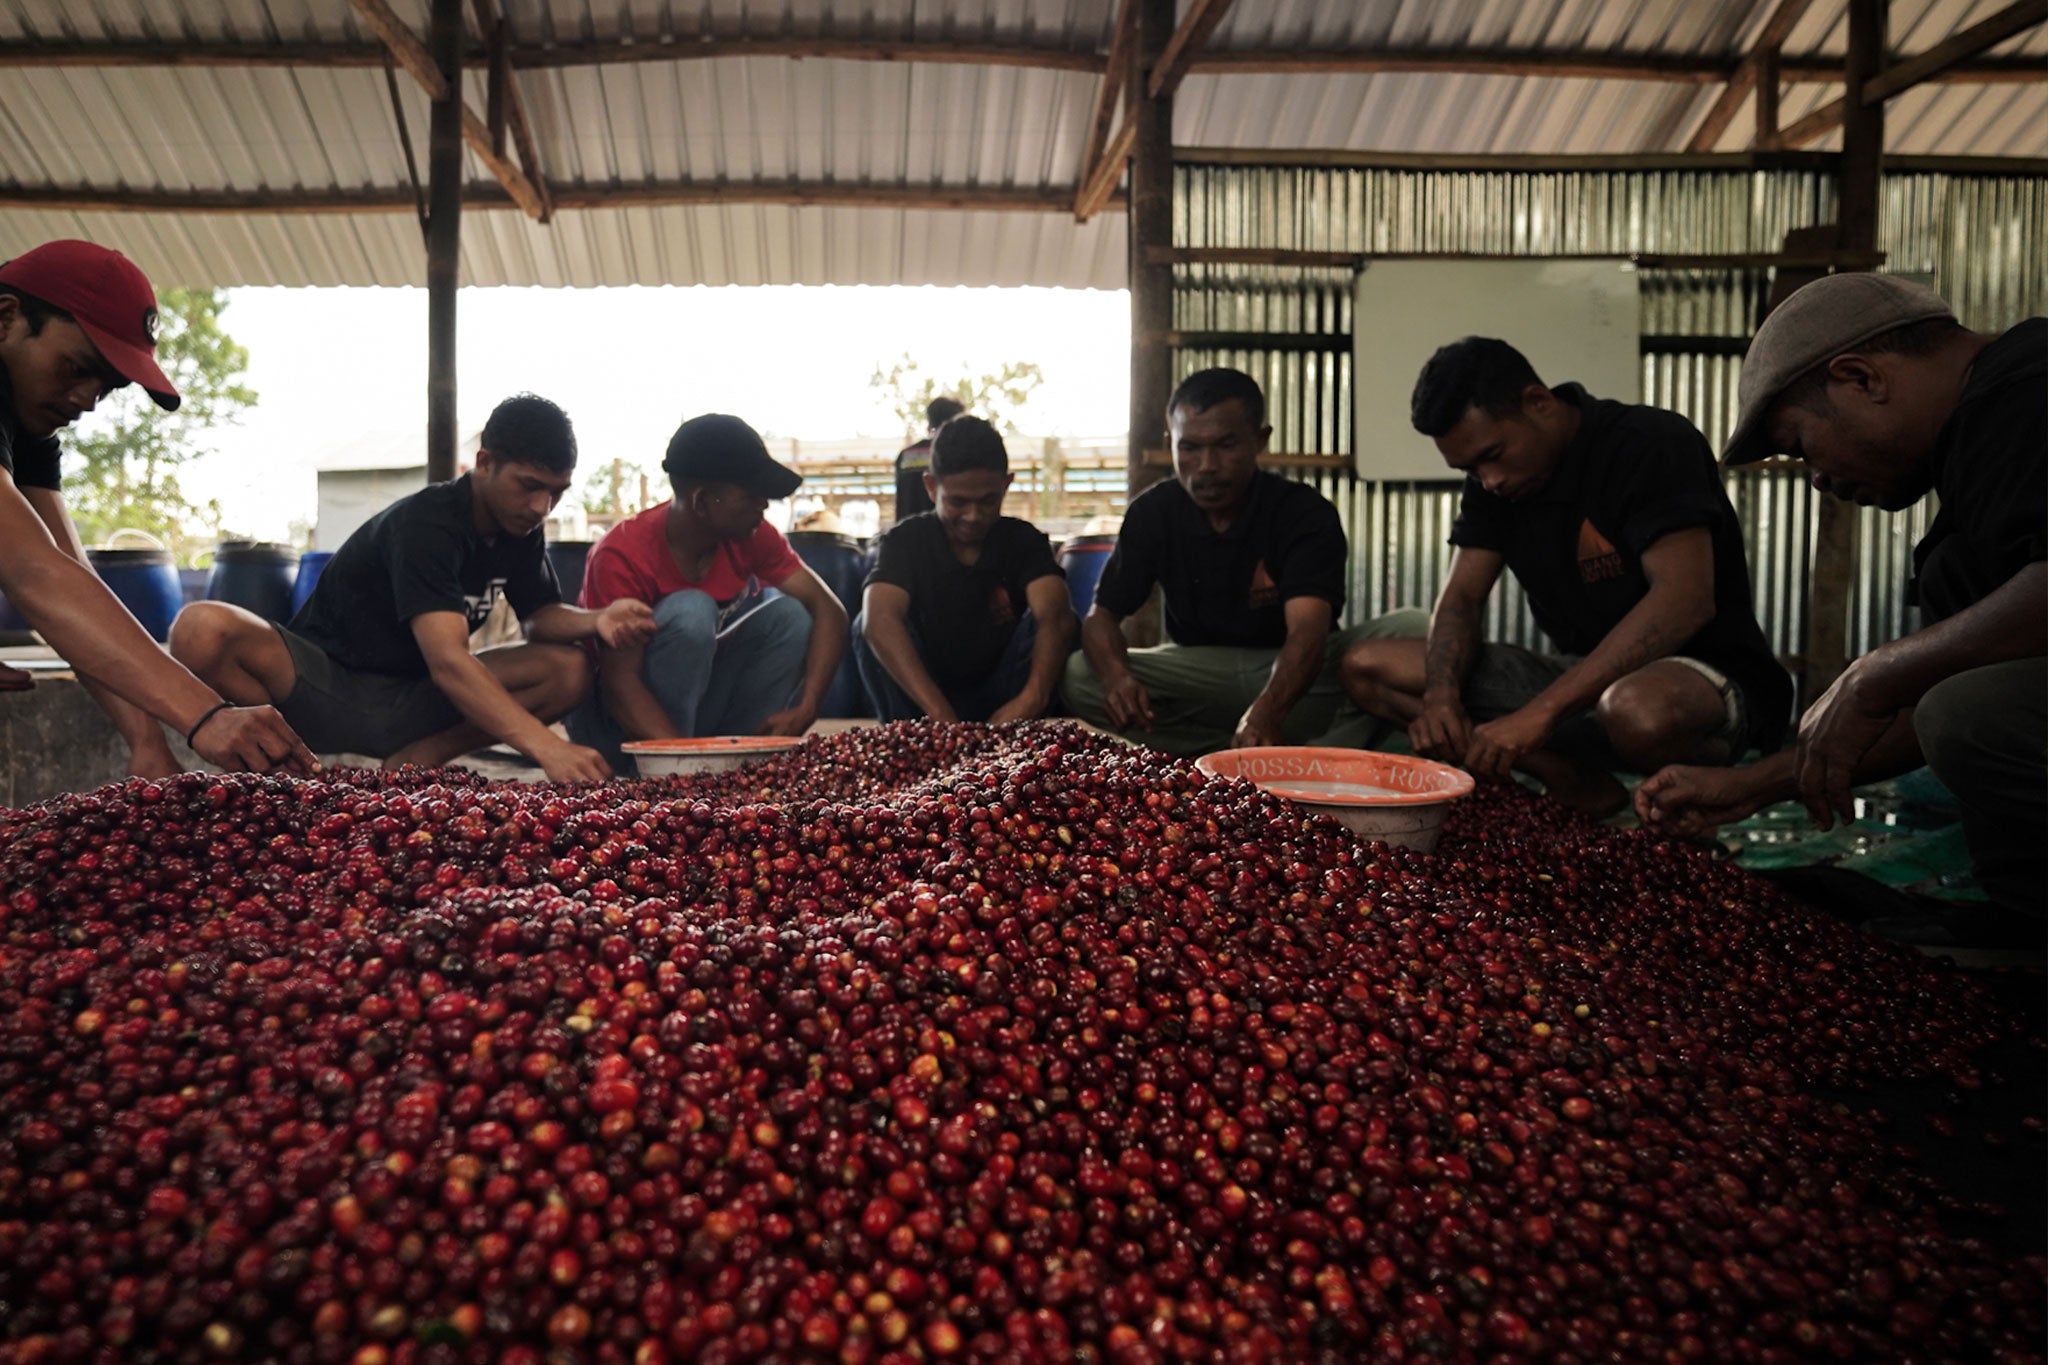 Several workers crouched around a pile of coffee cherries, picking through them.